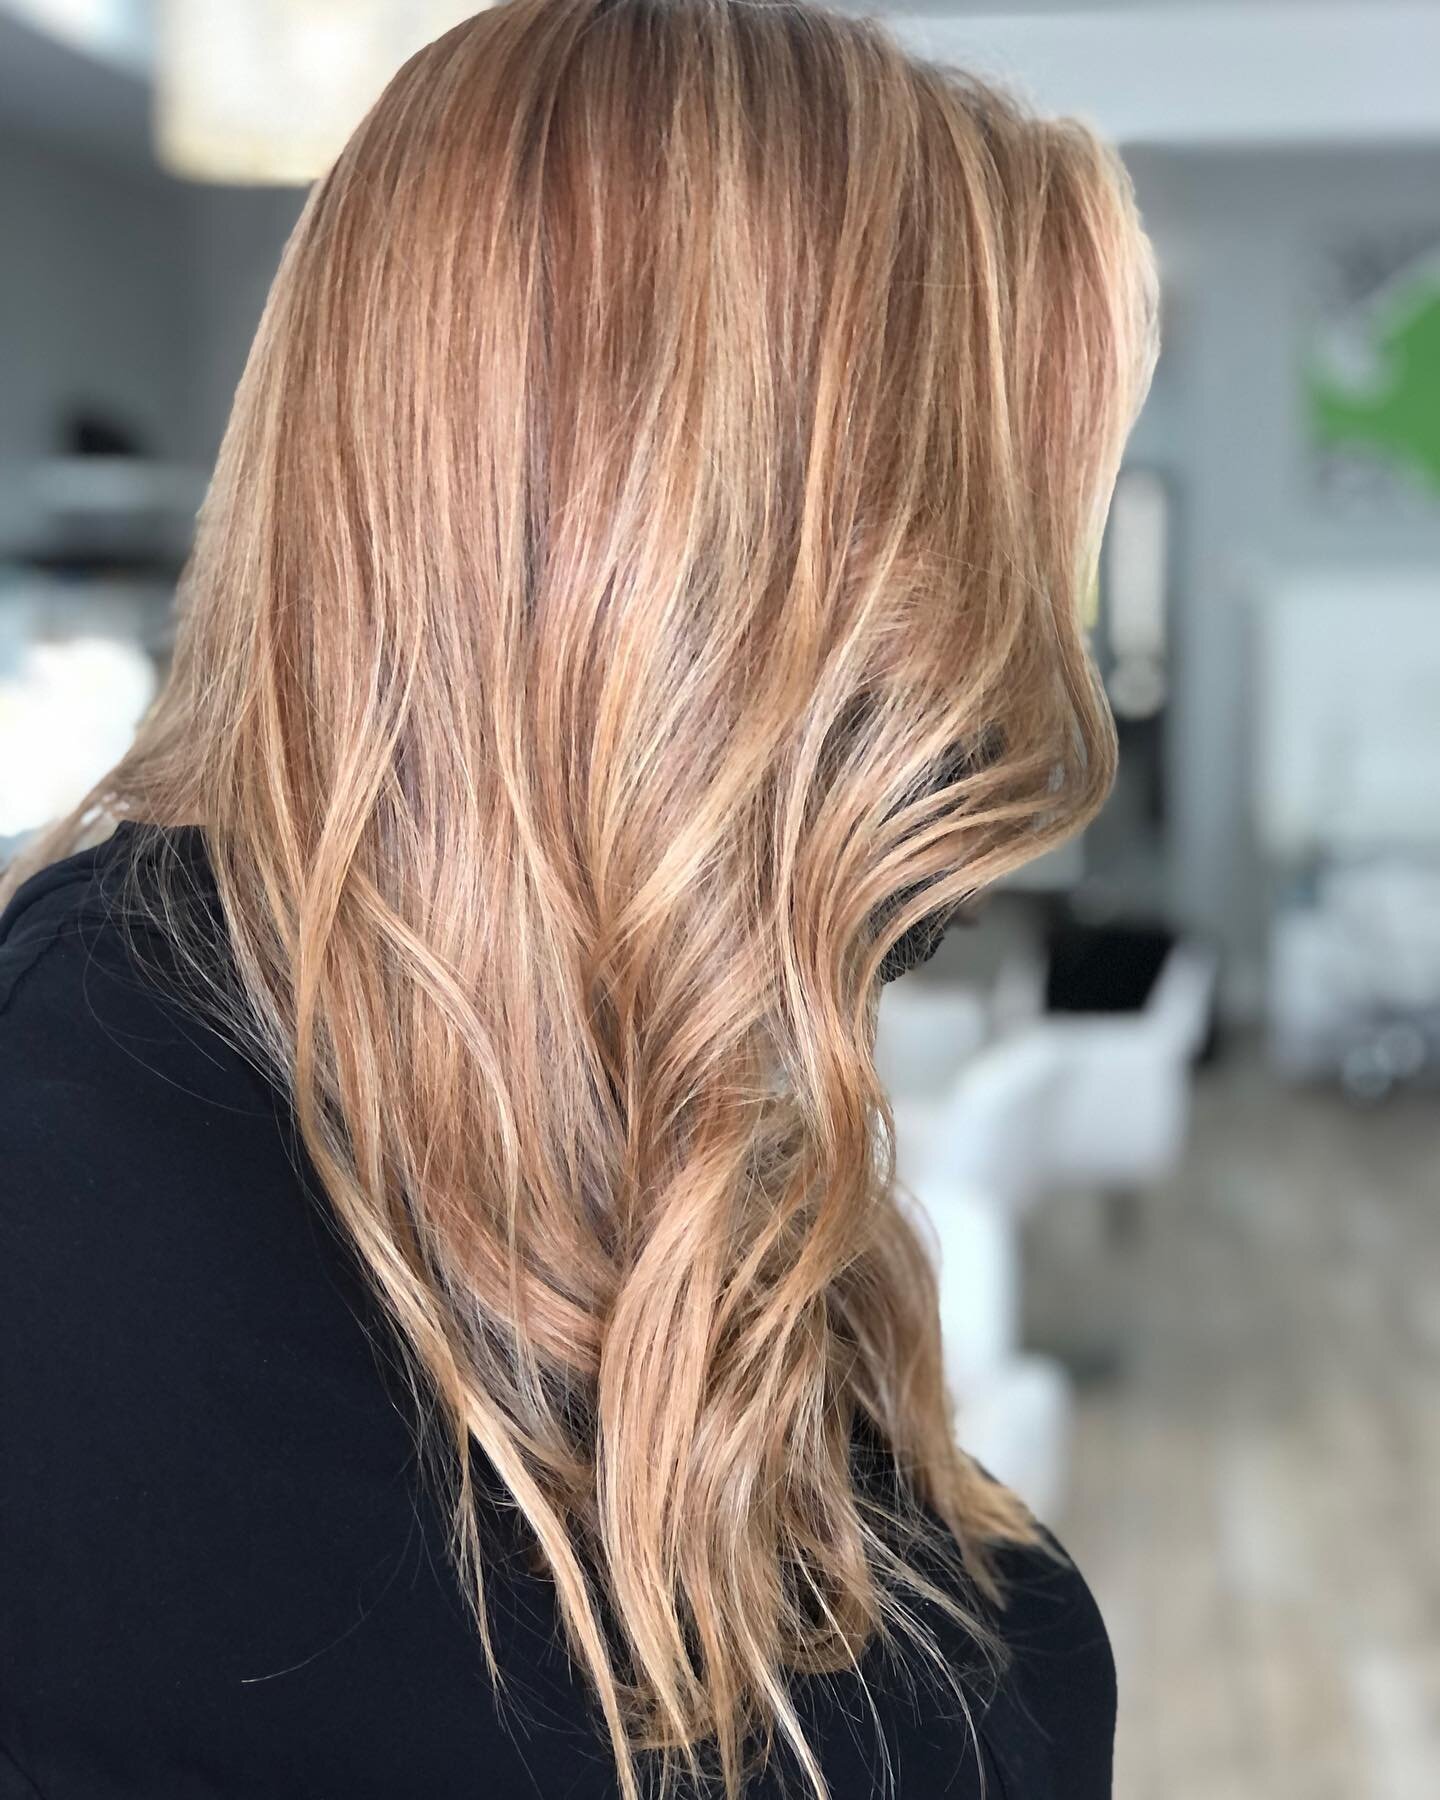 Heading back #blonde from red hot copper 💥
. Swipe right to see #redheadlove 🧡💛